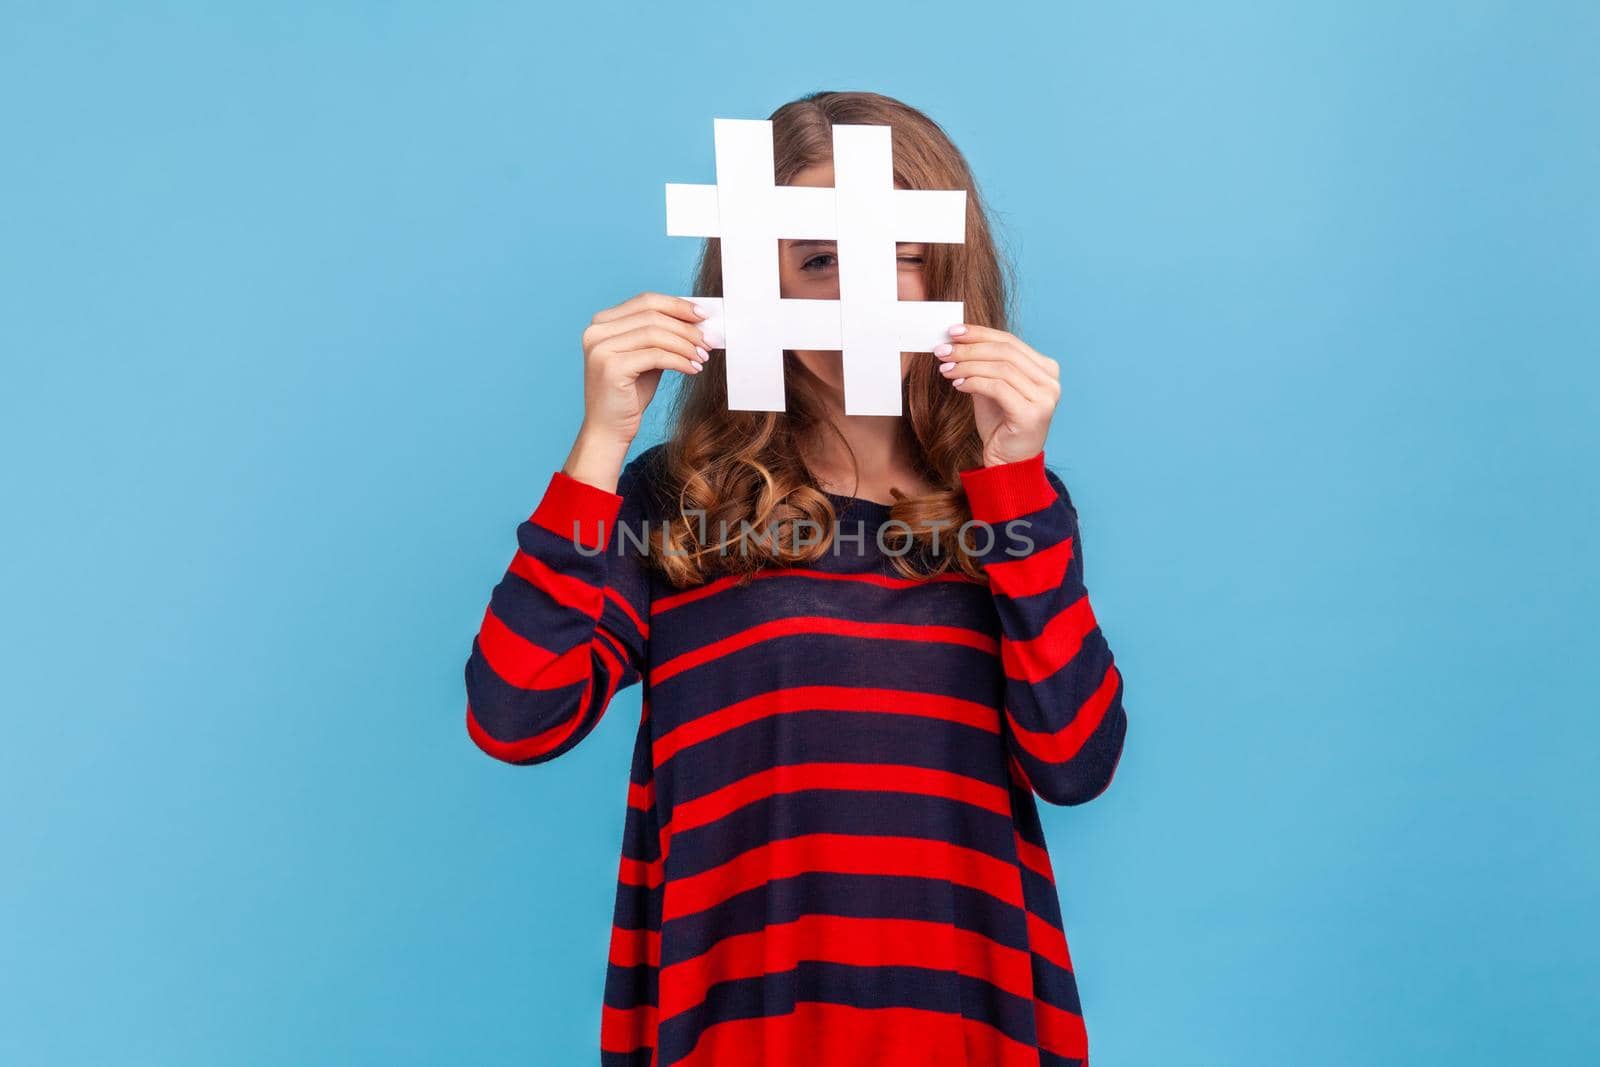 Curious woman wearing striped casual style sweater, looking at camera through large white hashtag symbol with prying eye, interesting web content. Indoor studio shot isolated on blue background.